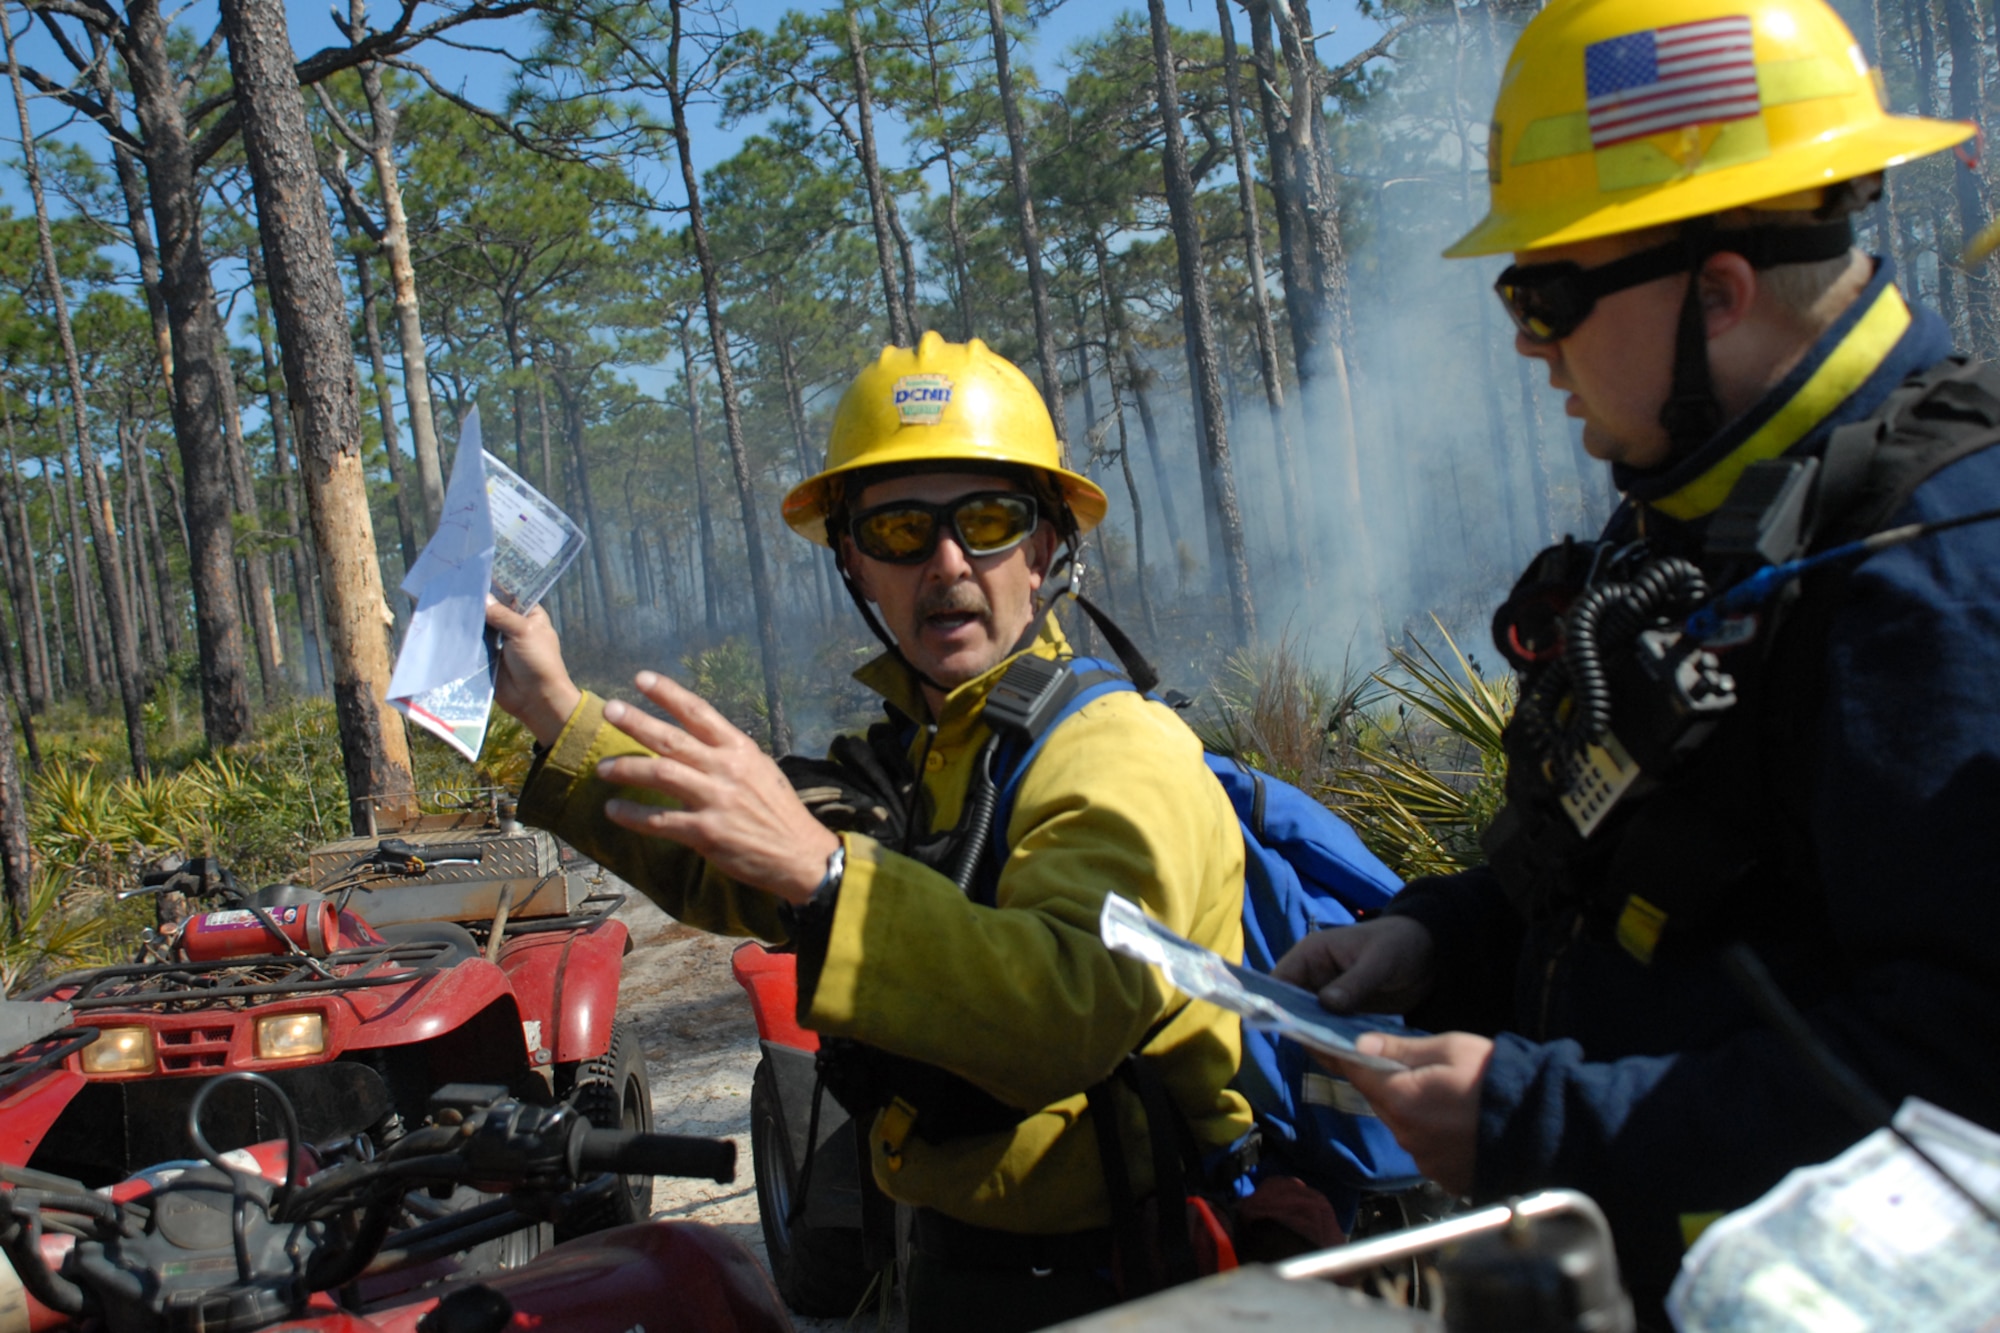 EGLIN AIR FORCE BASE, Fla. -- Keith Hawk, a Jackson Guard forestry technician and wildland fire specialist, goes over the plan for the for a prescribed burn at White Point, an 85-acre recreation area on the Choctawhatchee Bay Jan. 29. As the winds shift throughout the day, the burn plan is adjusted accordingly. Many native plants and animal species depend on Eglin's fire-dependent long-leaf pine ecosystem, 11 of which are federally protected. Endangered species such as the red-cockaded woodpecker, depend on fire that is typically caused by either lightning strikes or Eglin's resident fire managers to survive. As of the 2008 control burn season, Jackson Guard's five-year average is 73,000 acres burned annually. (U.S. Air Force Photo by Staff Sgt. Mike Meares)